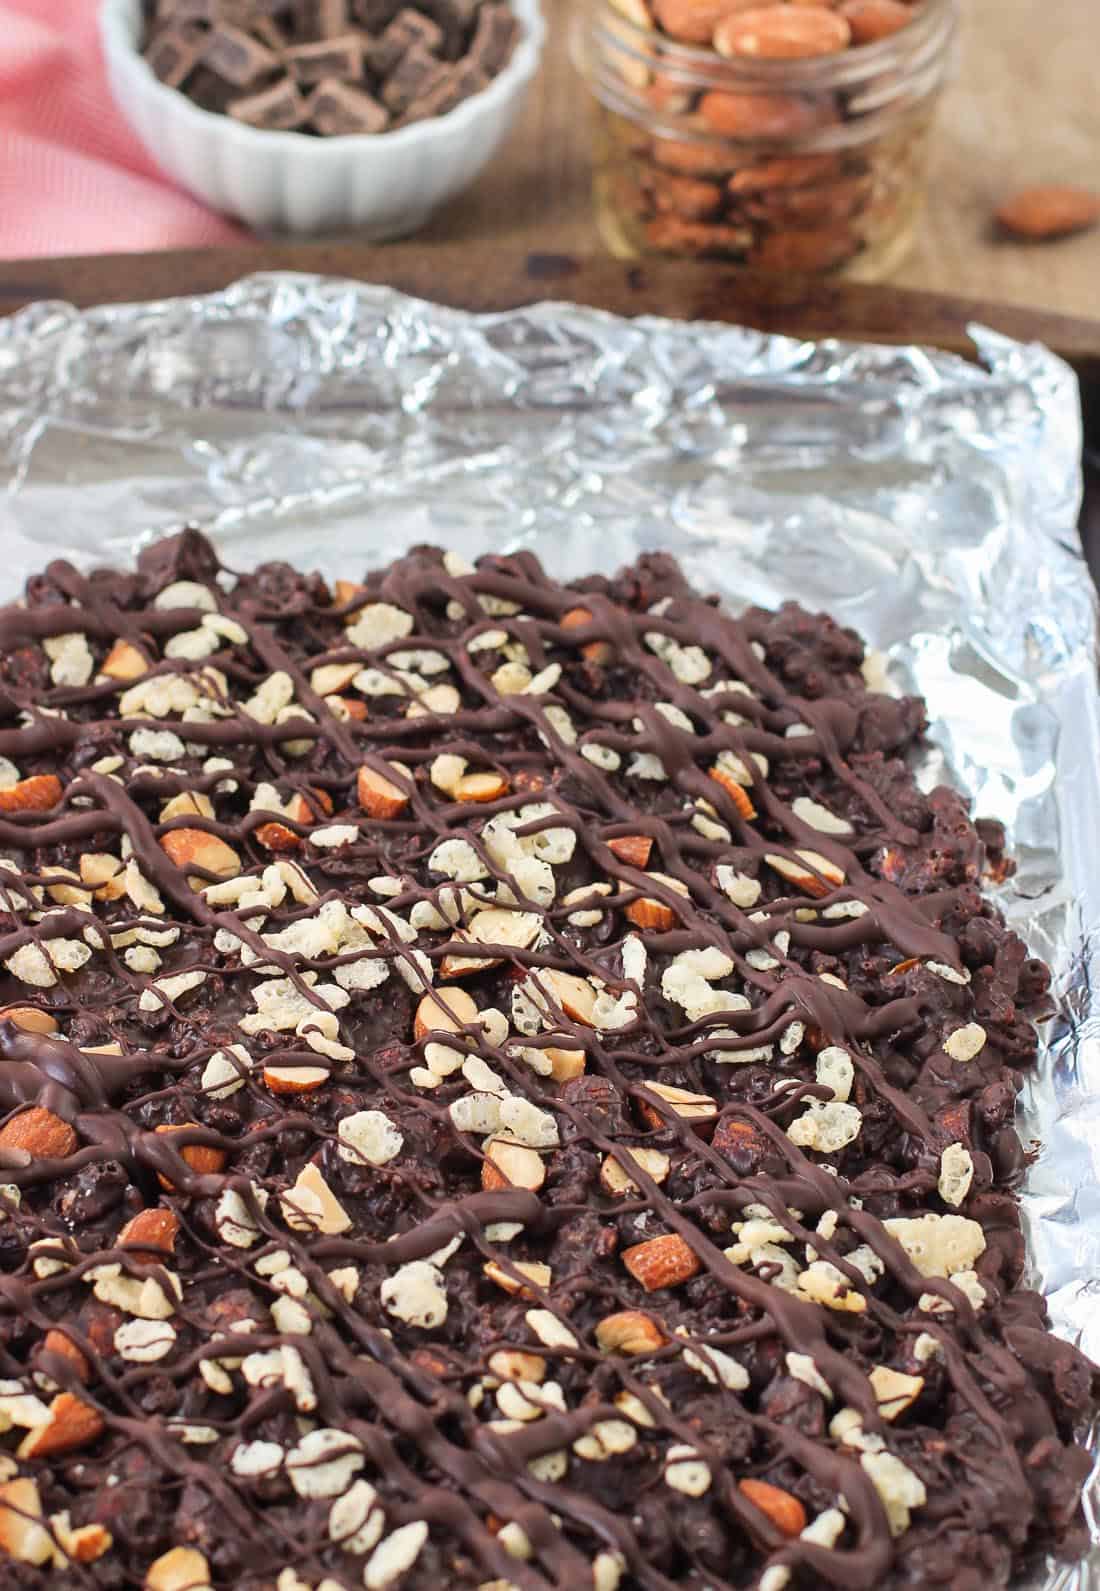 A slab of chocolate bark on an aluminum foil-lined baking sheet before cutting it into slices